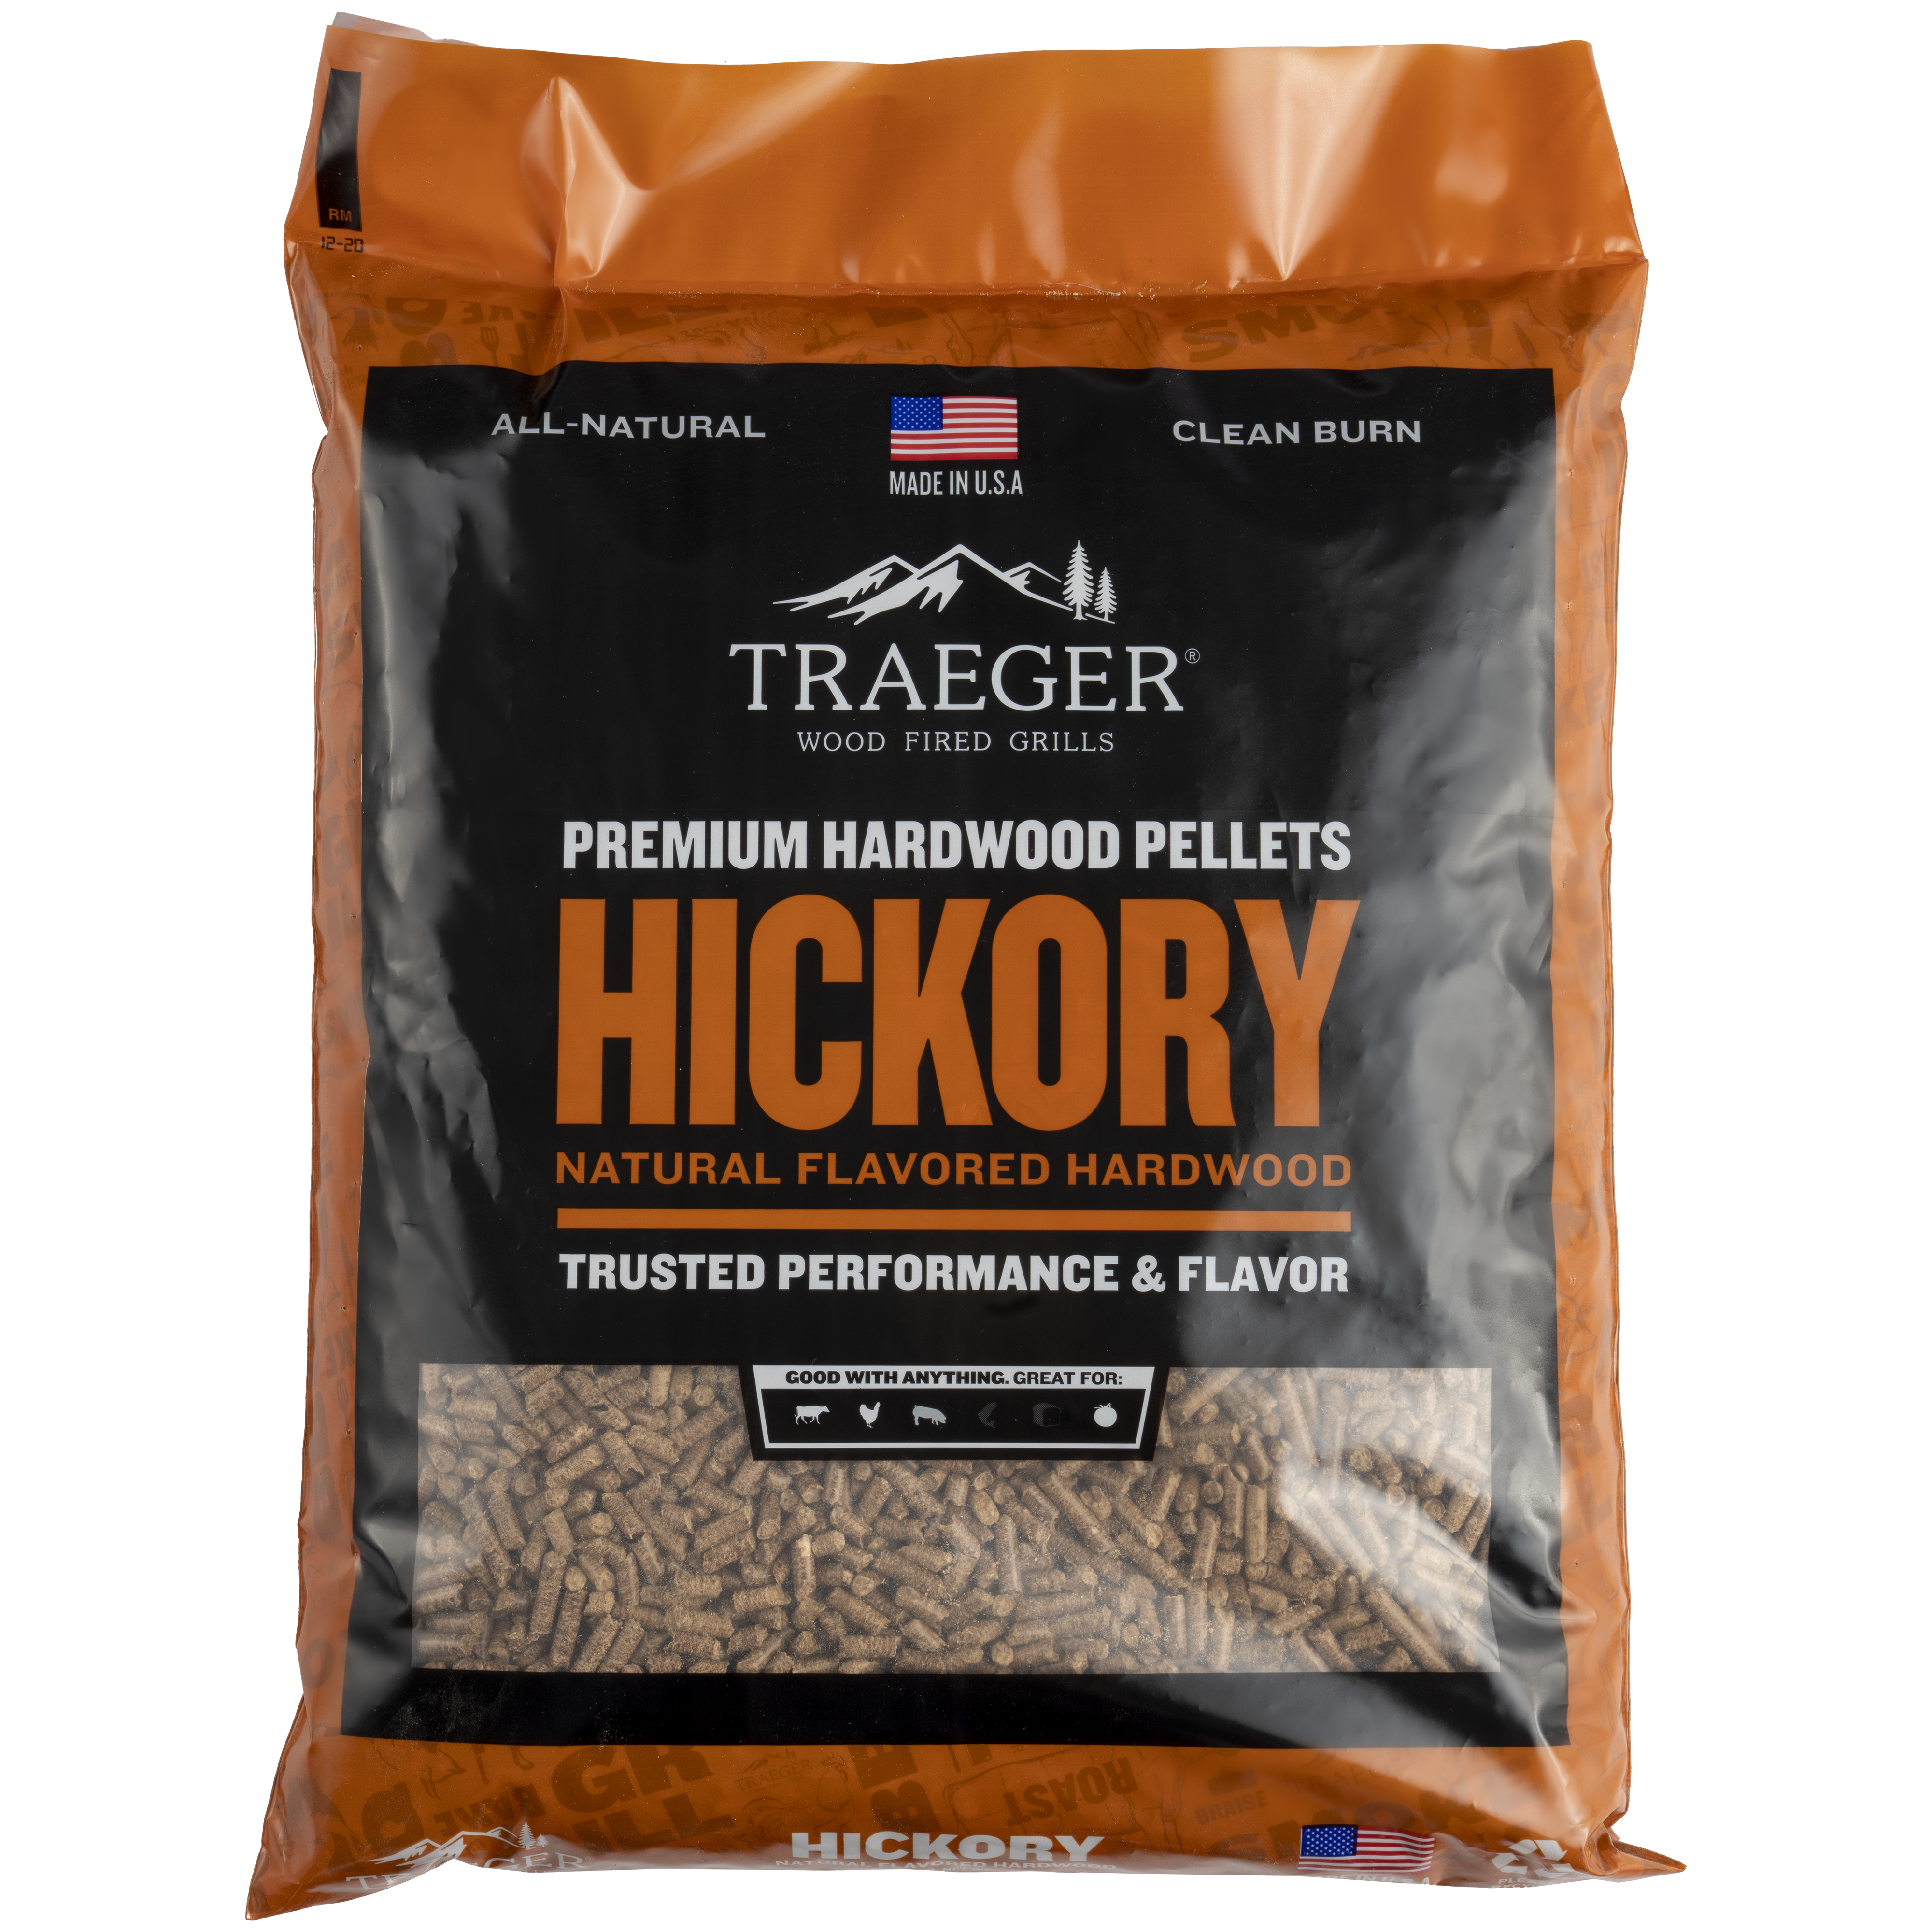 /assets/images/products/product-images/NXAAXP6VGYHQM/647fa108a3b8b_Hickory_Pellets_Studio_Front_WEB.png